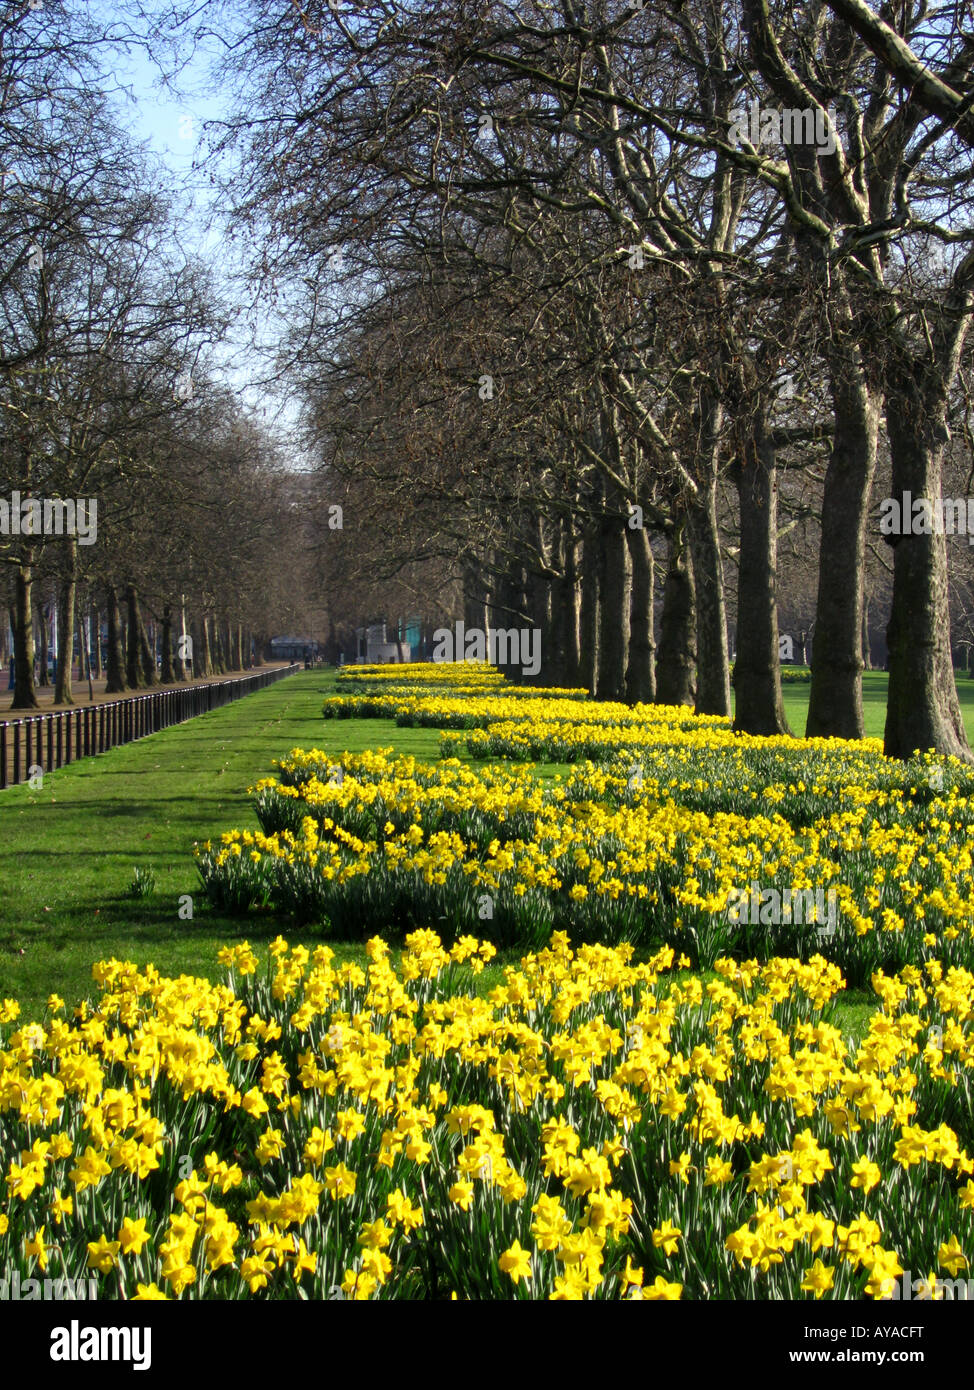 Daffodils flowering in Spring alongside The Mall City of Westminster London England UK Stock Photo